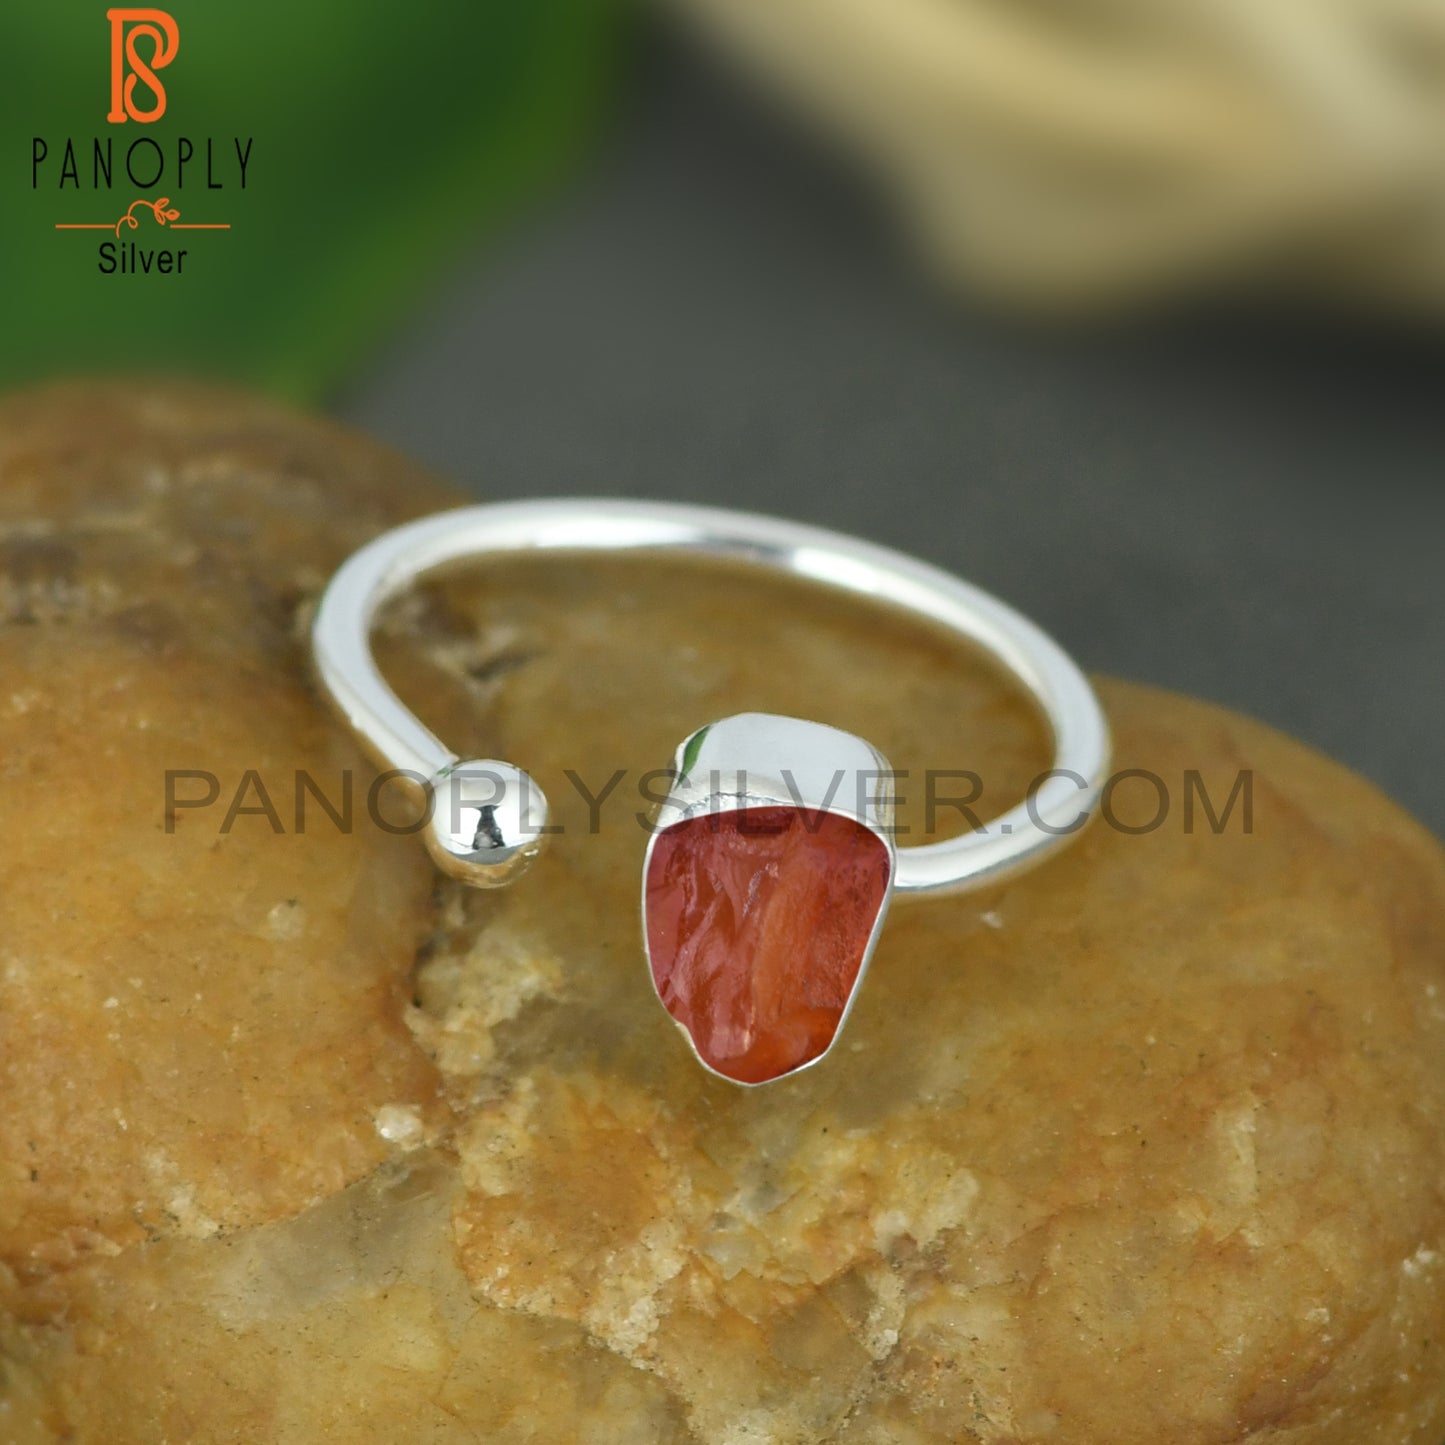 Carnelian Rough Adjustable 925 Sterling Silver Ring